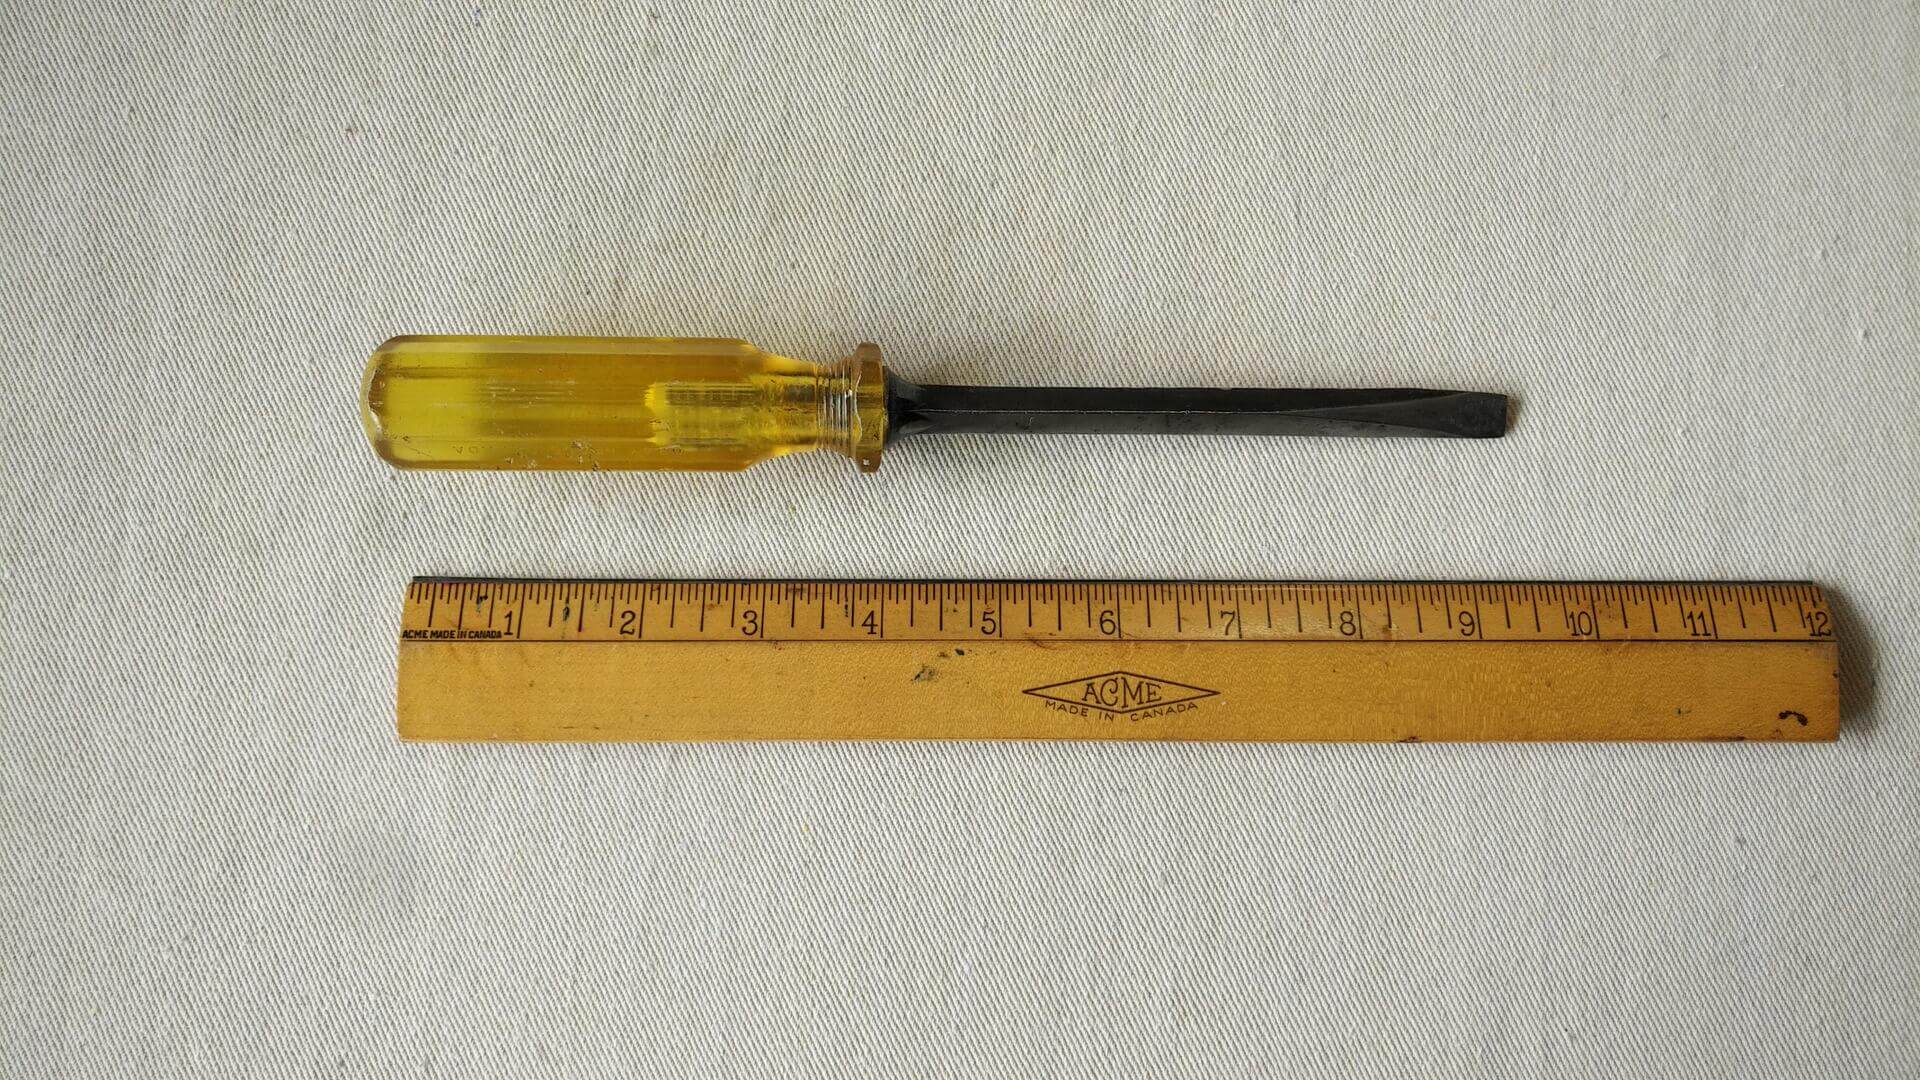 Gray No 606 heavy duty slotted screwdriver with square shaft and unbreakable yellow handle 9 1/2" long. Vintage made in Canada collectible hand tools